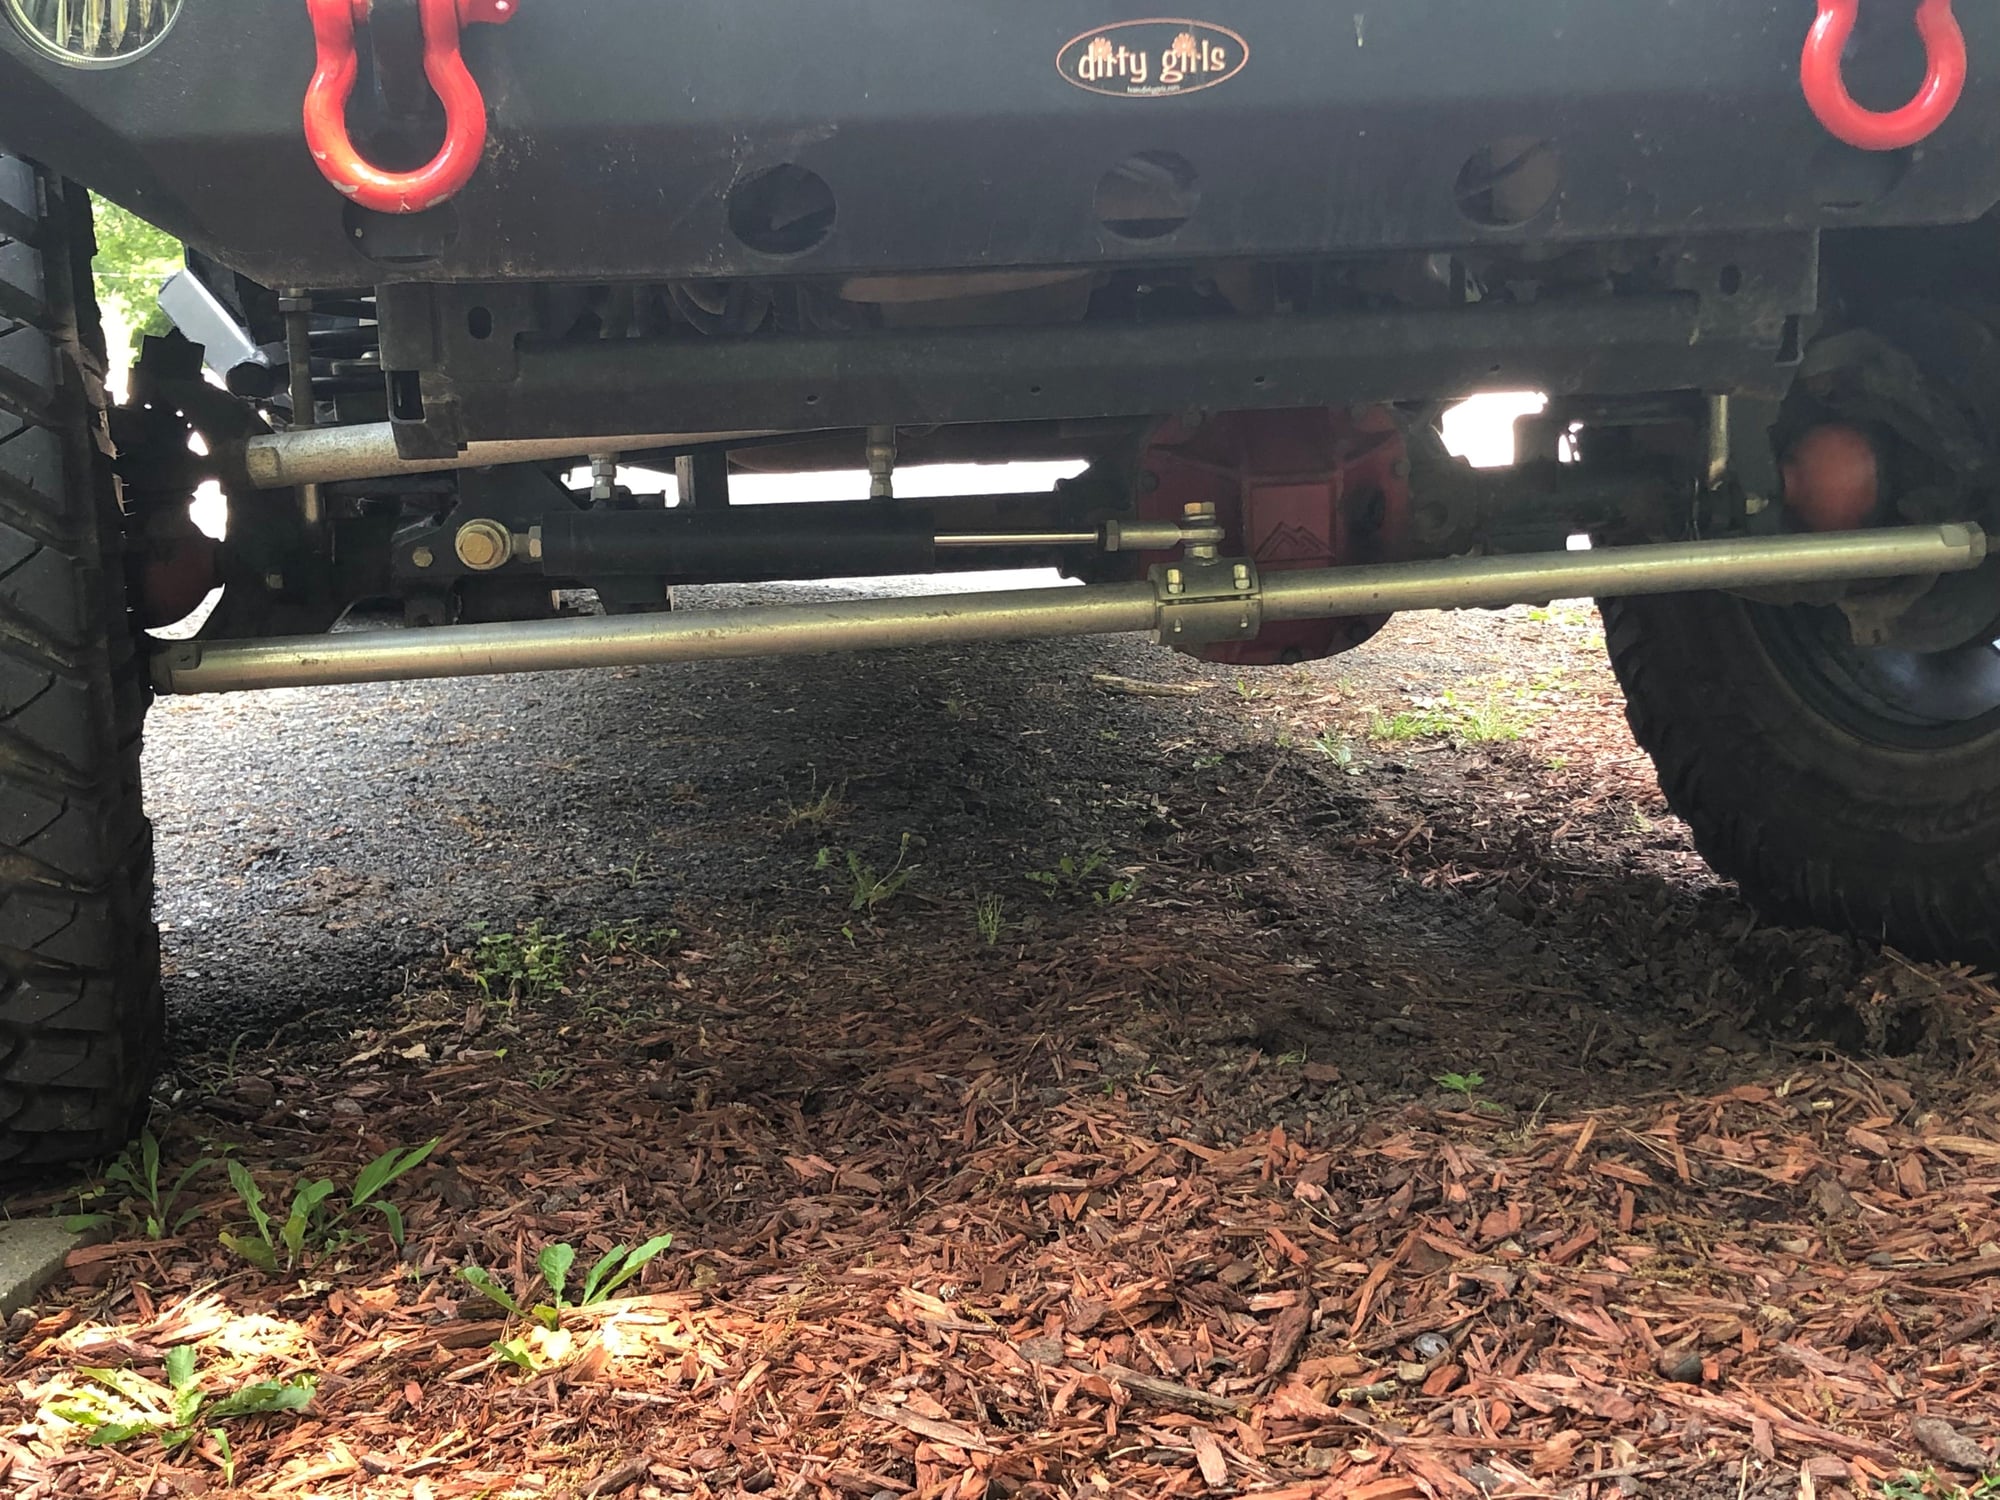 Wheels and Tires/Axles - Jeep Dana 30 front axle - Used - 2008 to 2018 Jeep Wrangler - Chattanooga, TN 37421, United States